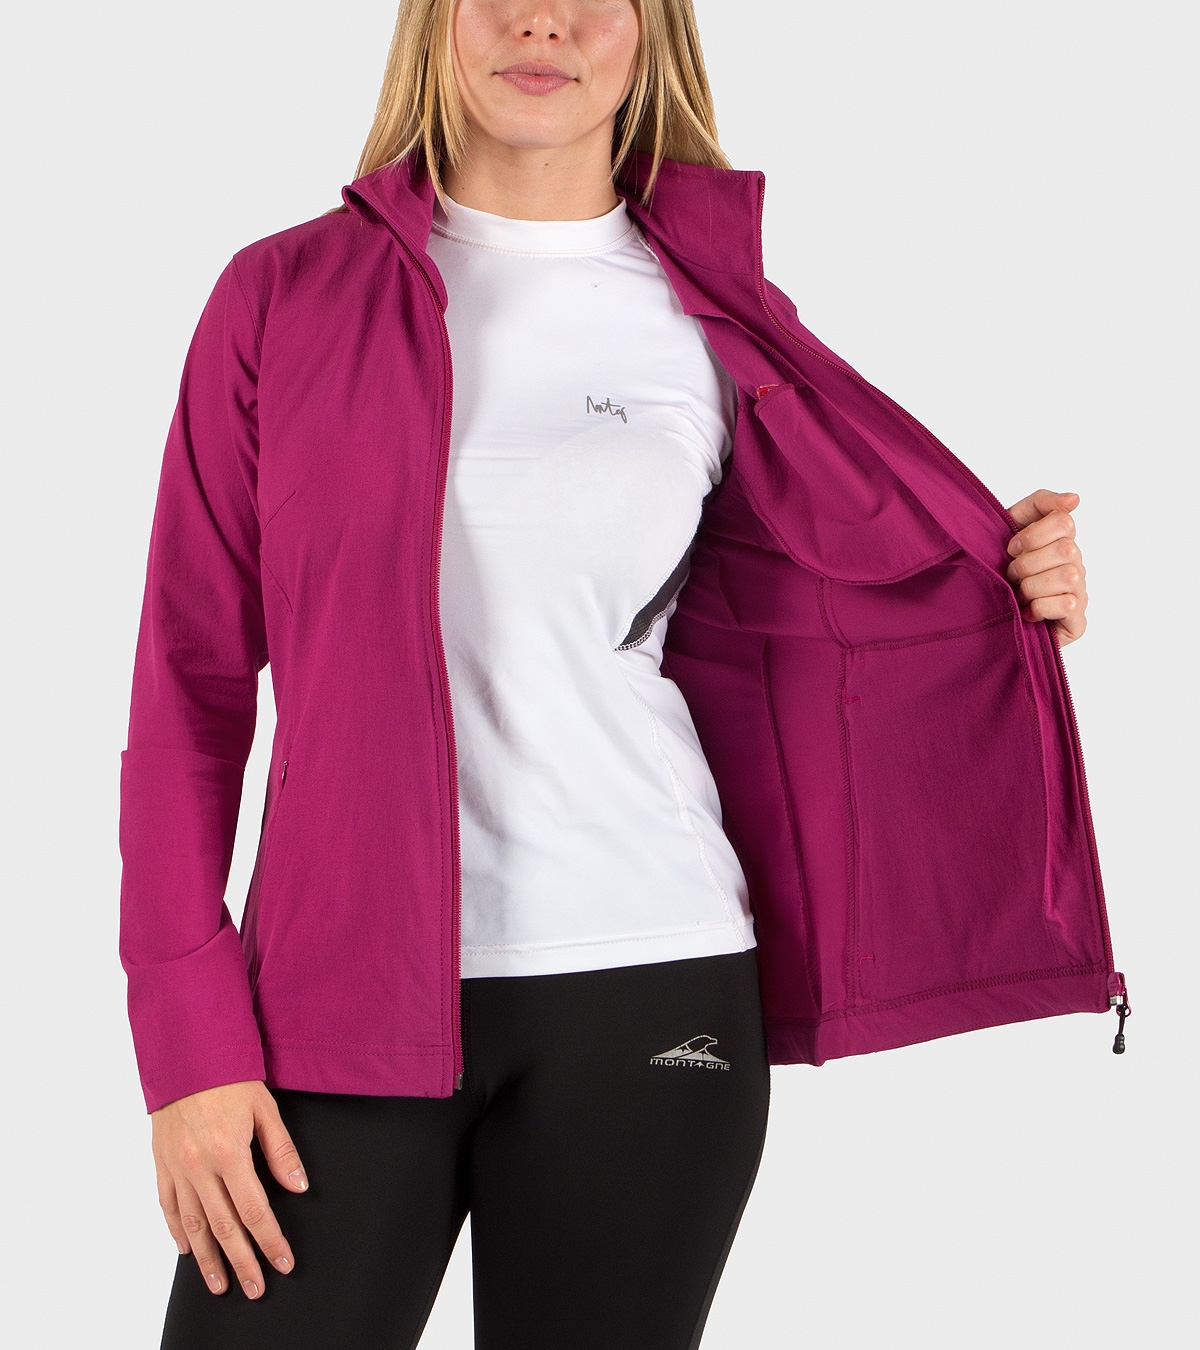 https://d368r8jqz0fwvm.cloudfront.net/18031-product_lg/campera-impermeable-de-mujer-manila-verano.jpg